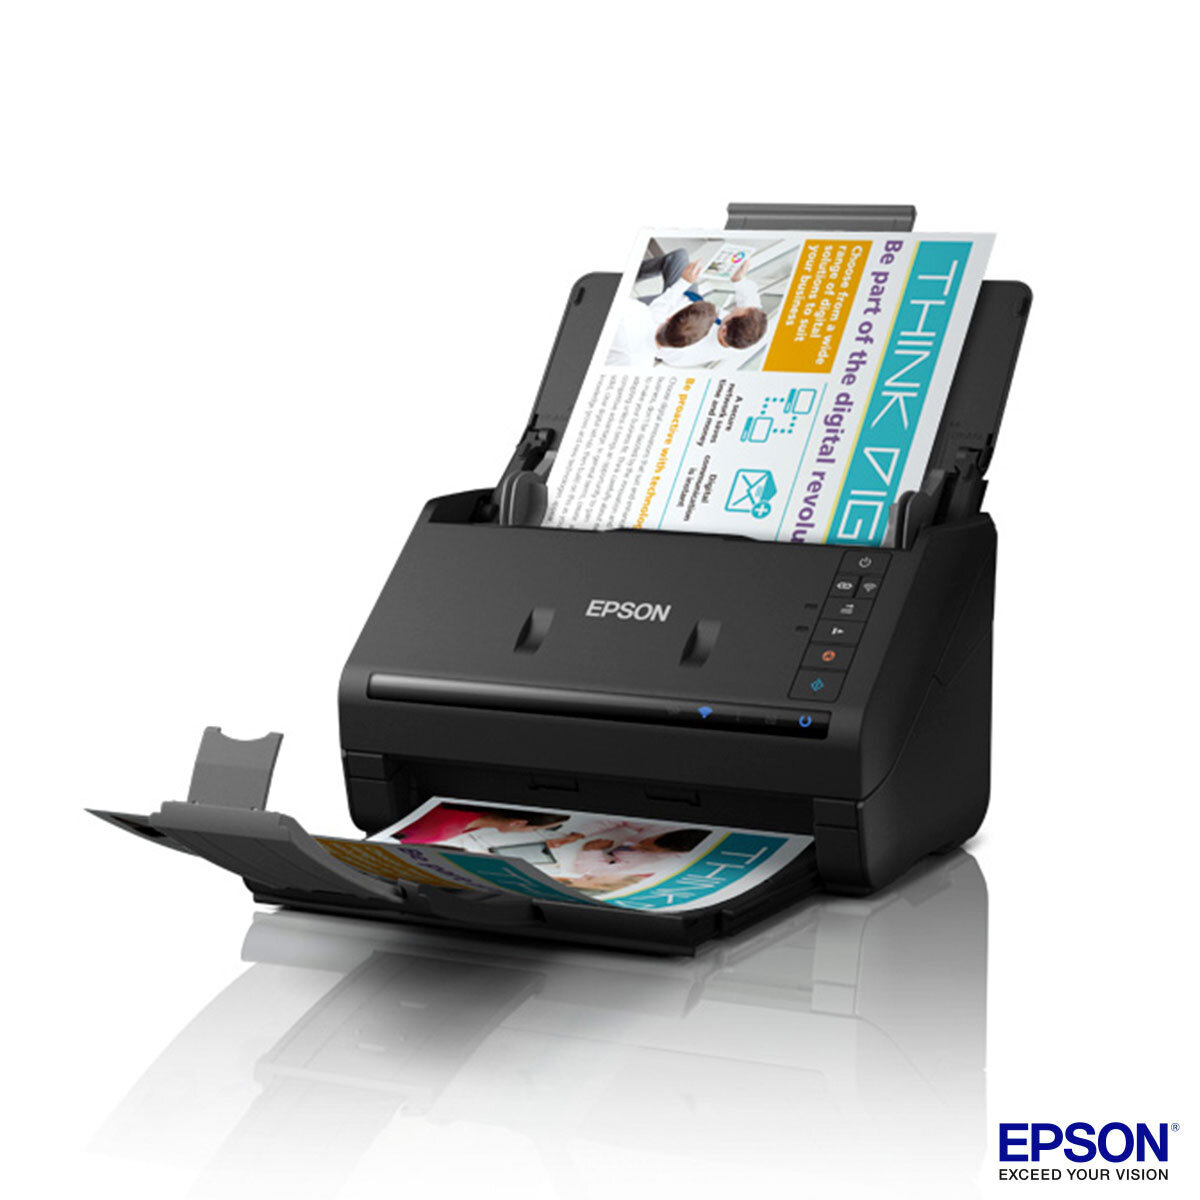 Buy Epson WorkForce ES-500W Scanner Overview Image at Costco.co.uk